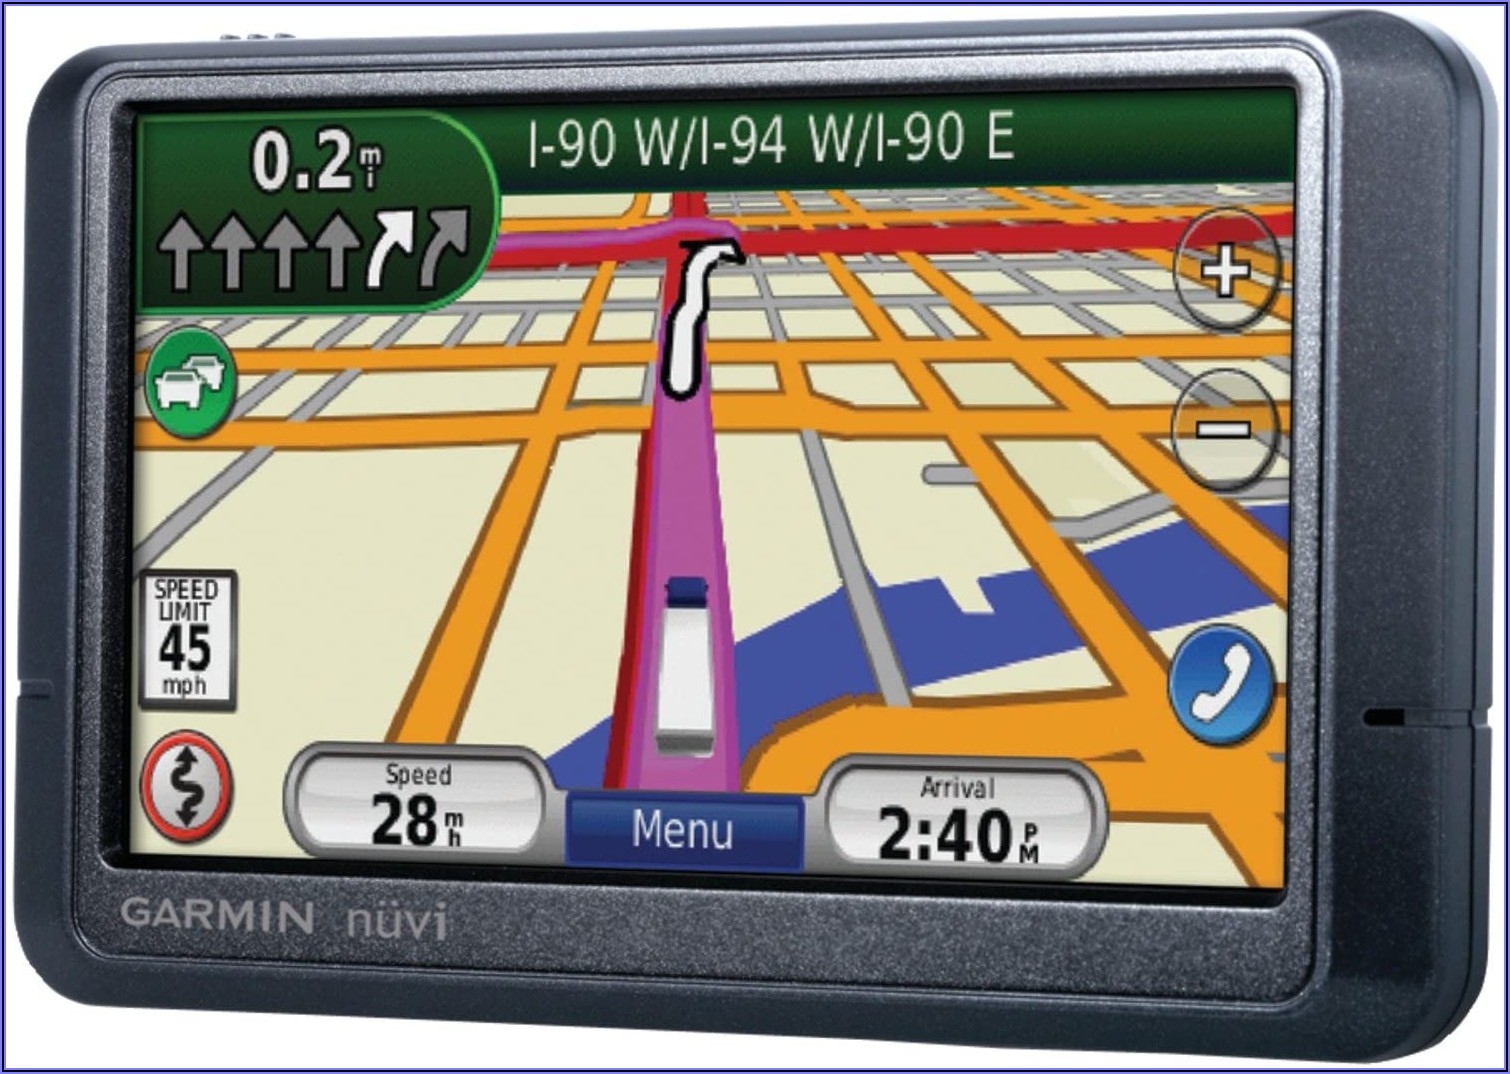 Garmin Drive 50 Gps Navigation System With Lifetime Maps And Traffic